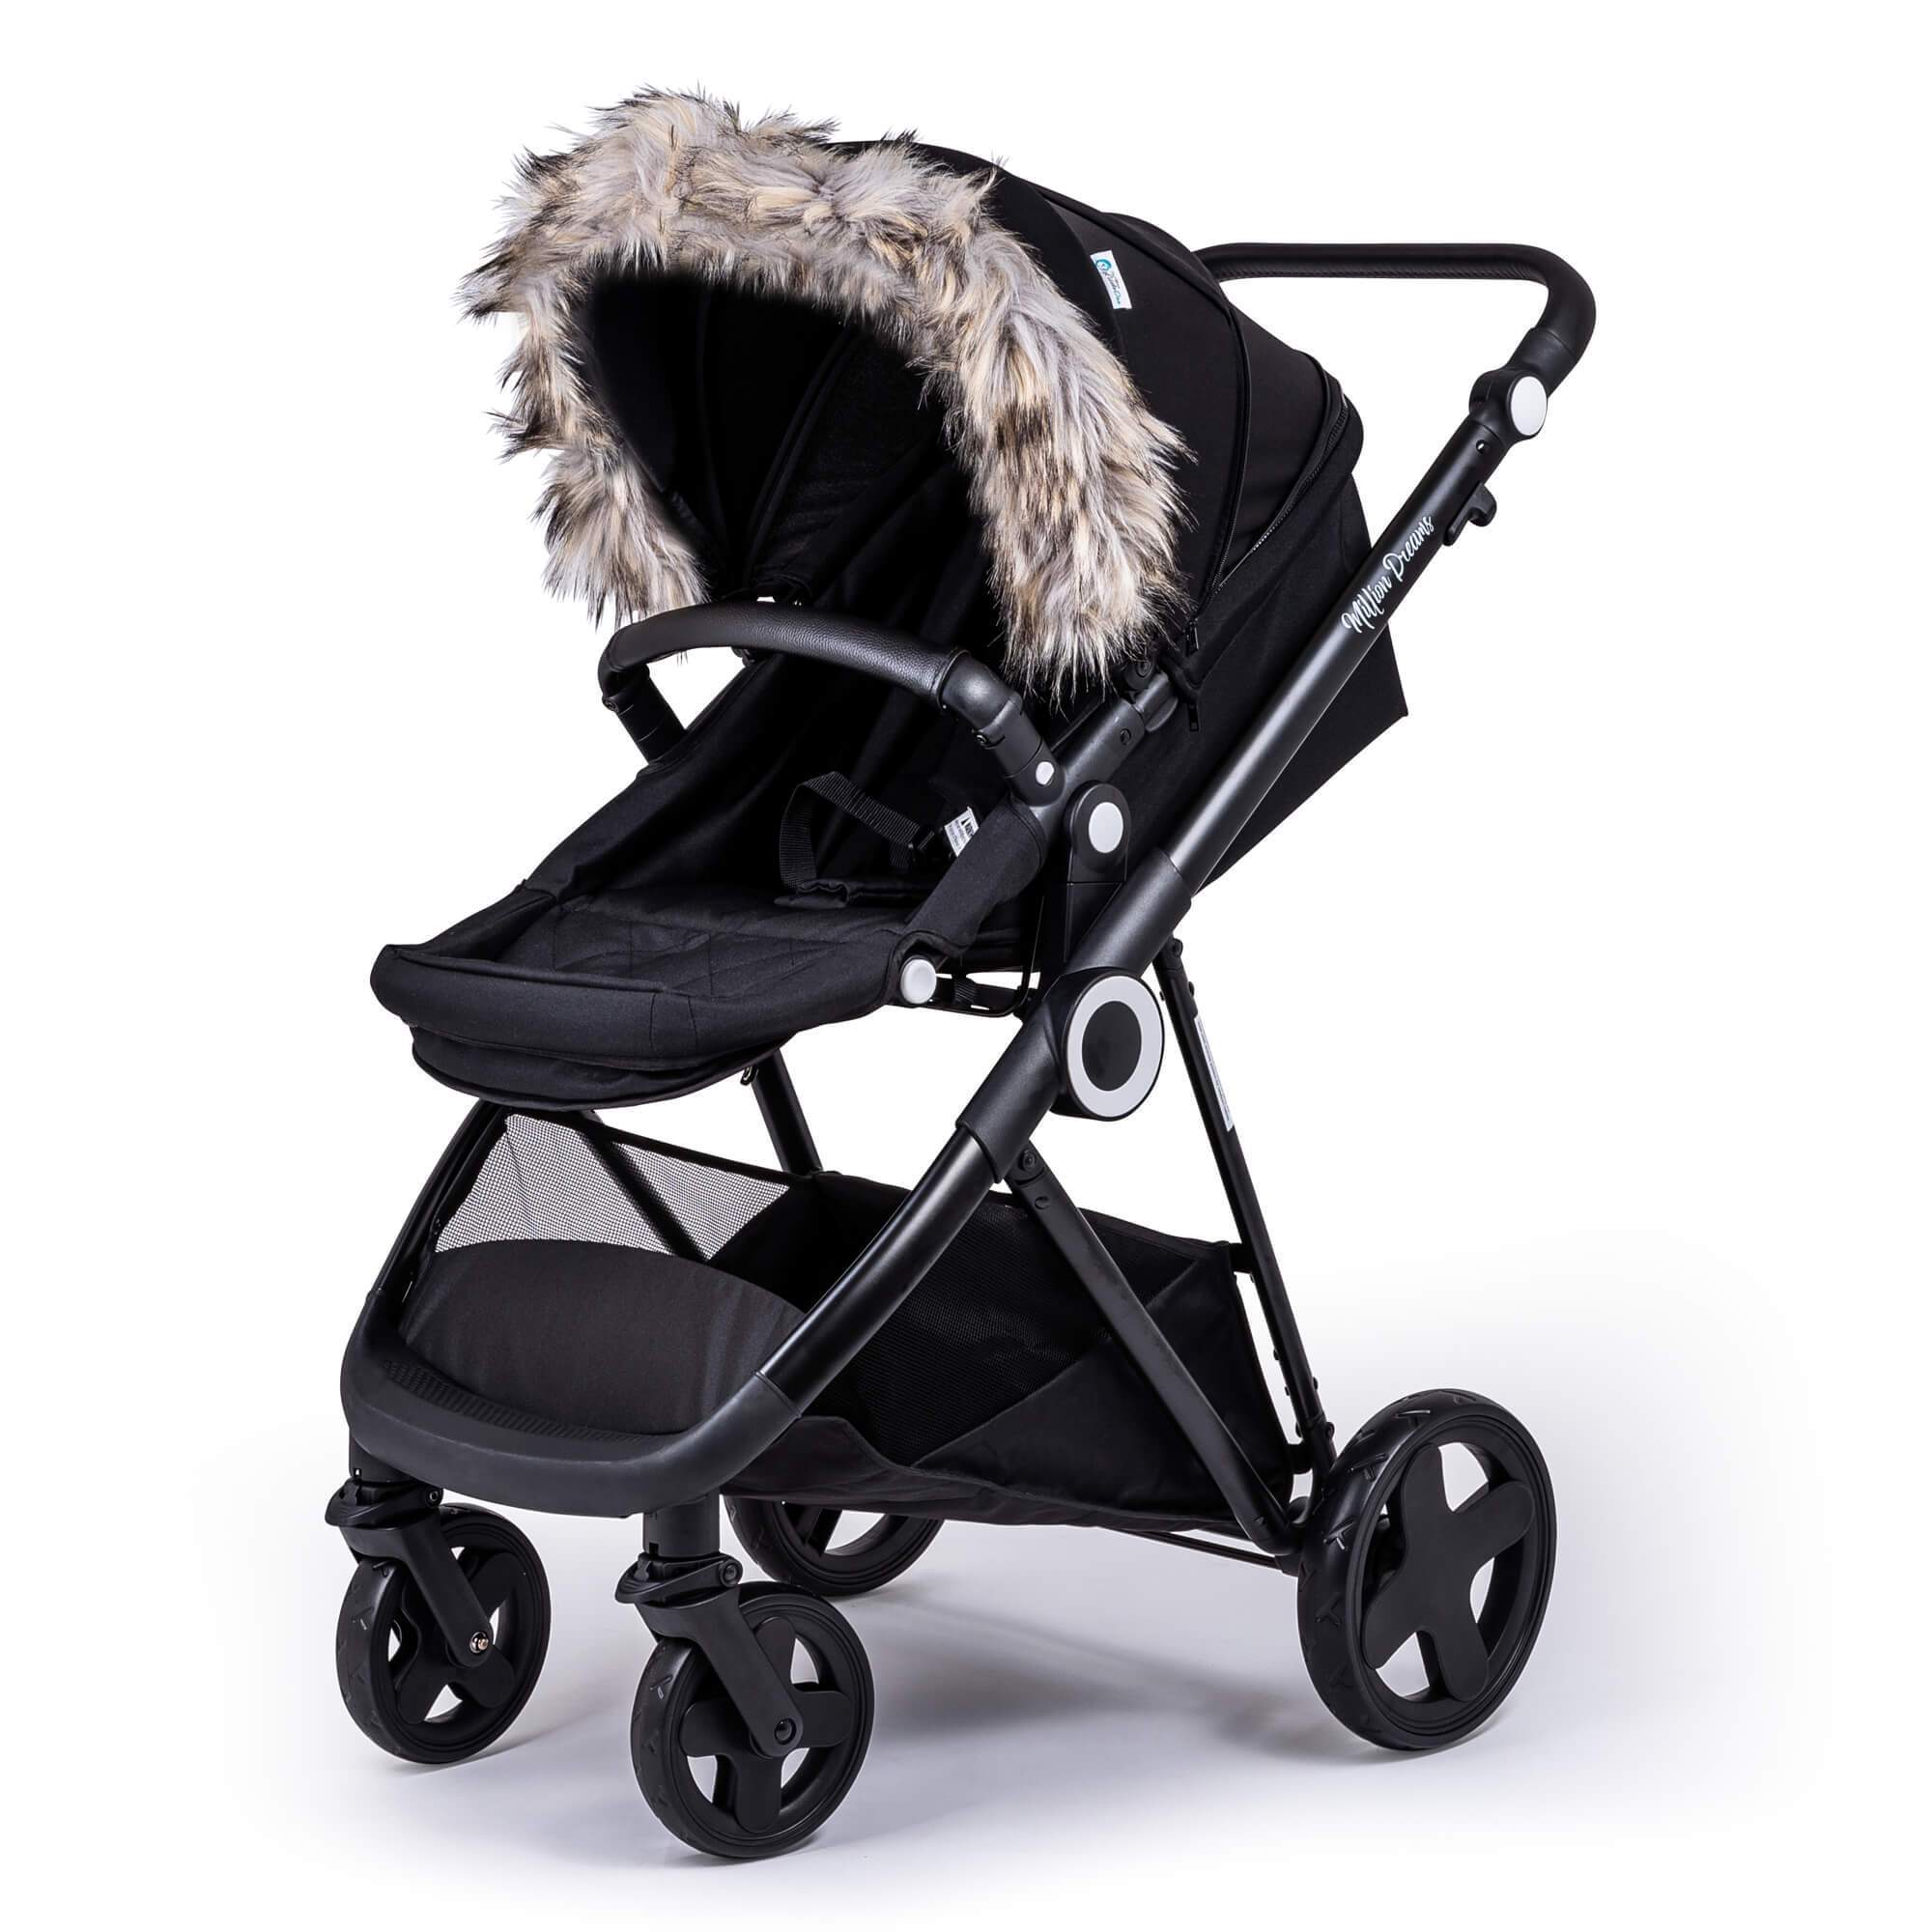 Pram Fur Hood Trim Attachment For Pushchair Compatible with Ickle Bubba - Light Grey / Fits All Models | For Your Little One